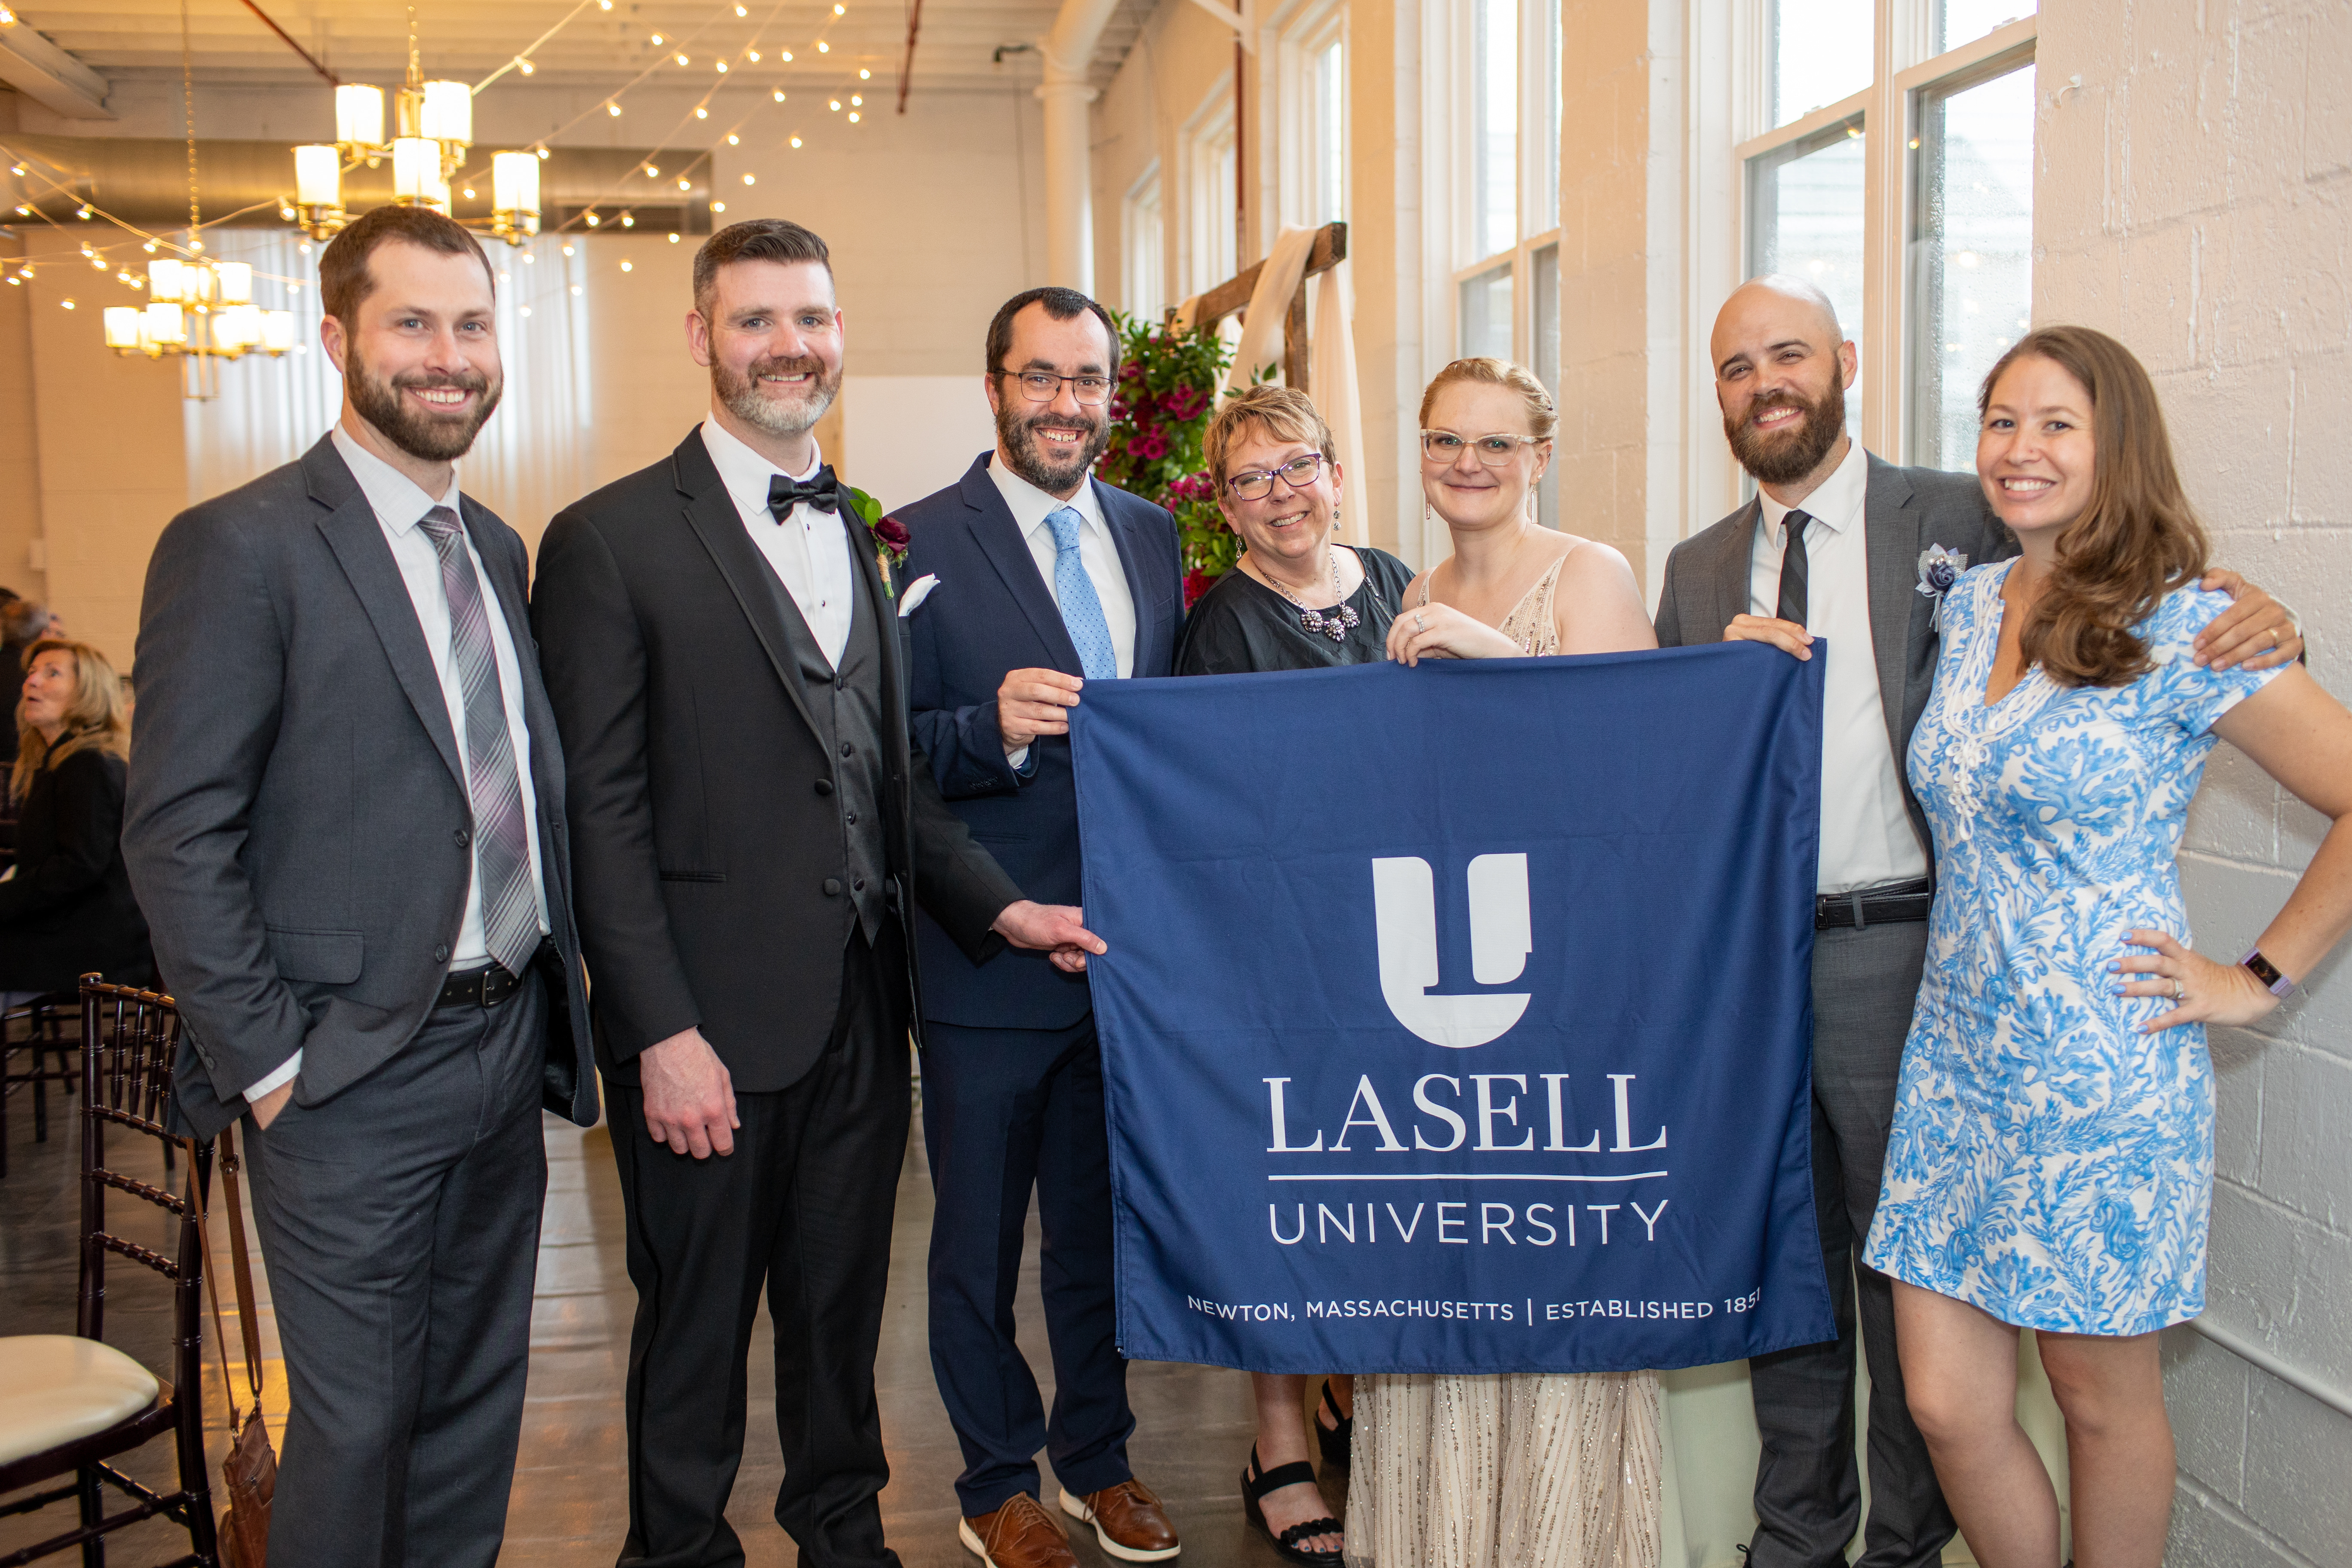 Brittany Baker '07 and Patrick Sullivan '16 wedding with Lasell guests